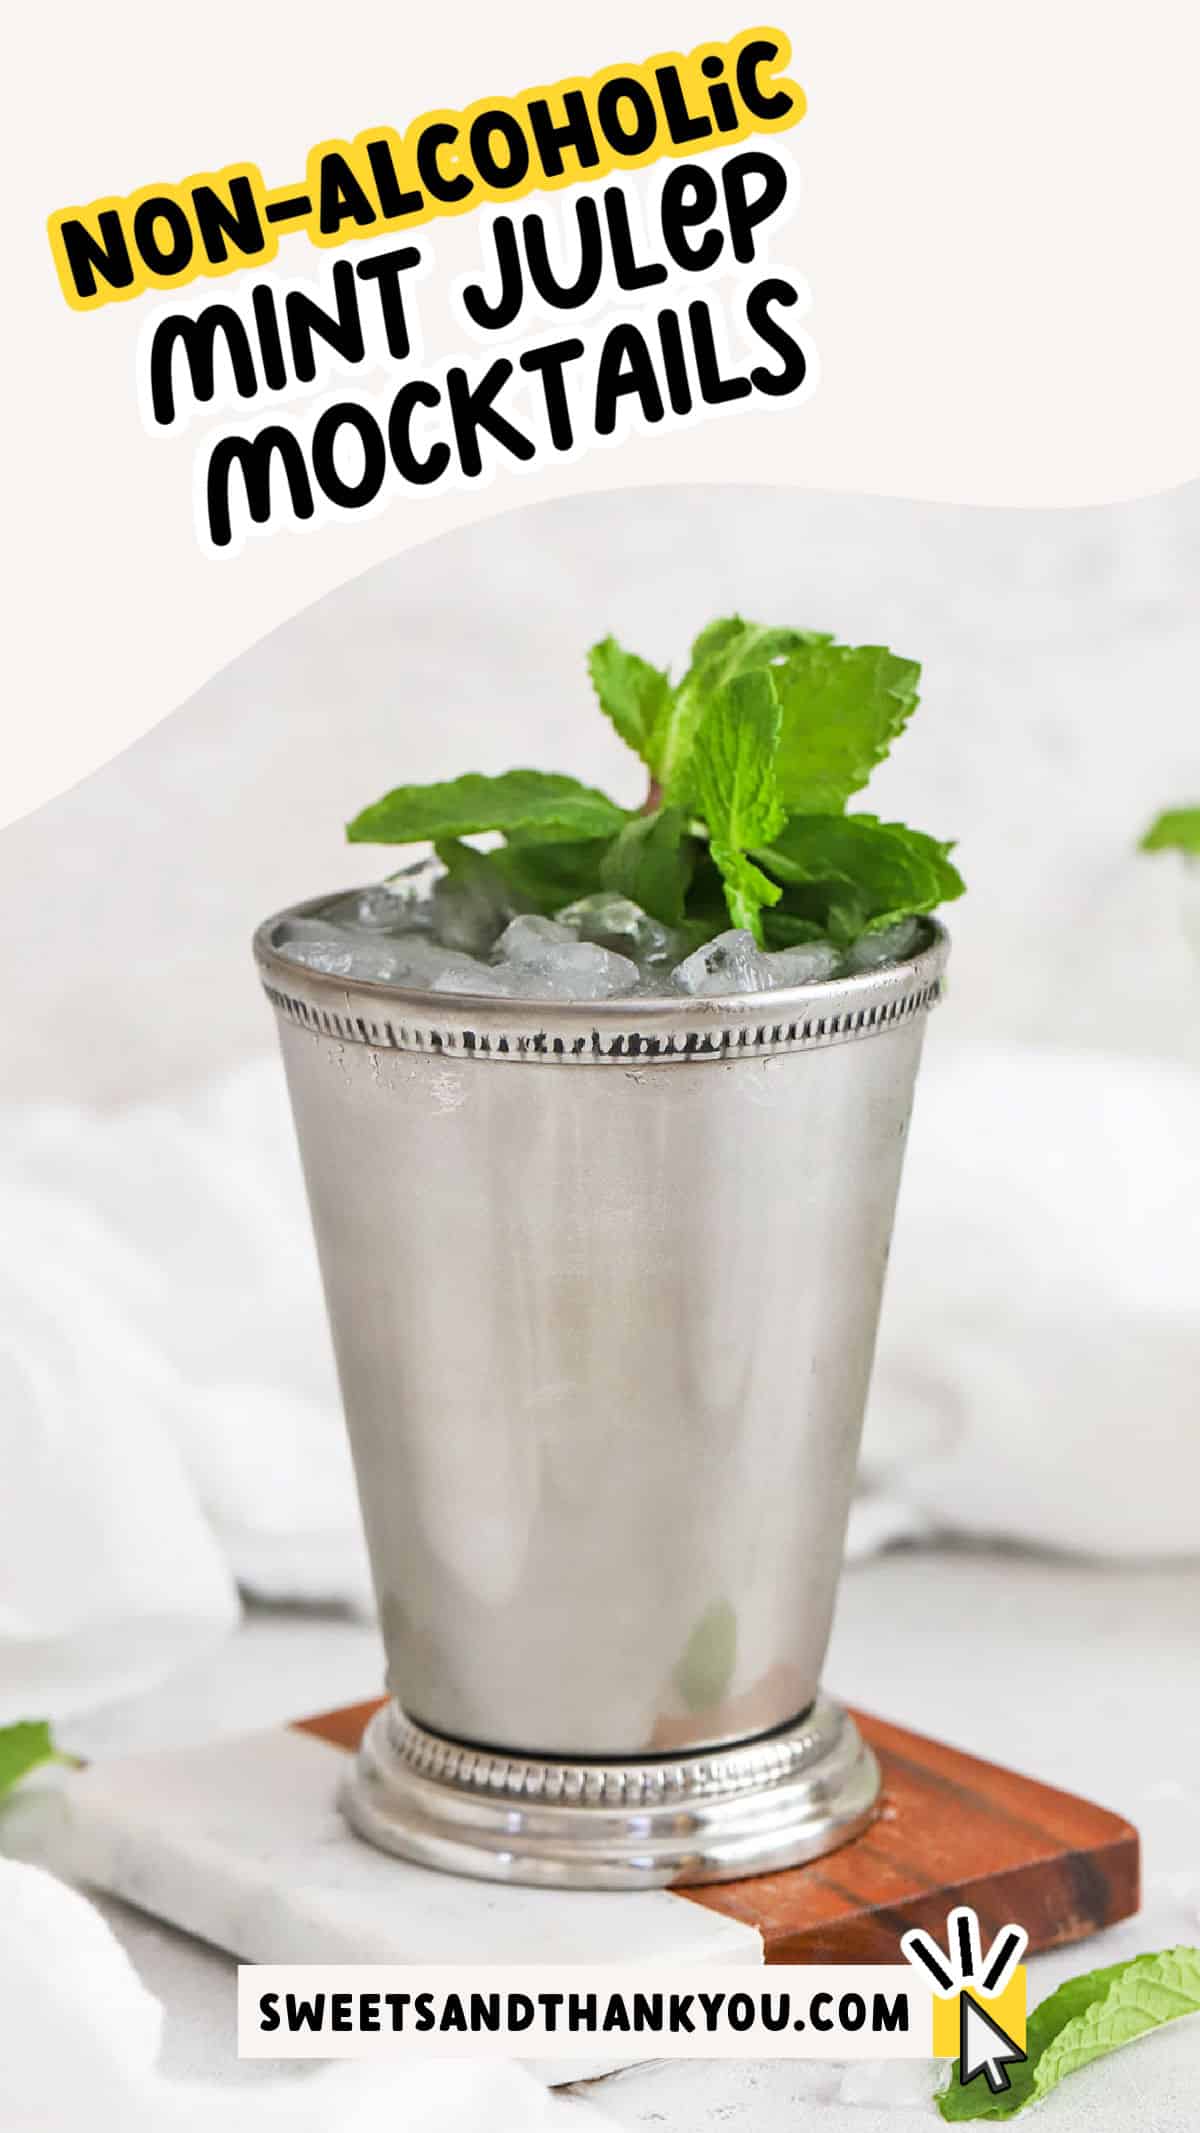 Craving a virgin mint julep for Derby day? We've got you covered with our easy Disneyland mint julep mocktail recipe! If you've been looking for a disneyland copycat mint julep recipe, your search stops here! We make this mint julep mocktail with simple ingredients like mint simple syrup, fresh mint, lemonade, and lemon-lime soda. The flavors are bright and refreshing--a perfect summer mocktail! Get the recipe & yummy variations to try at sweetsandthankyou.com